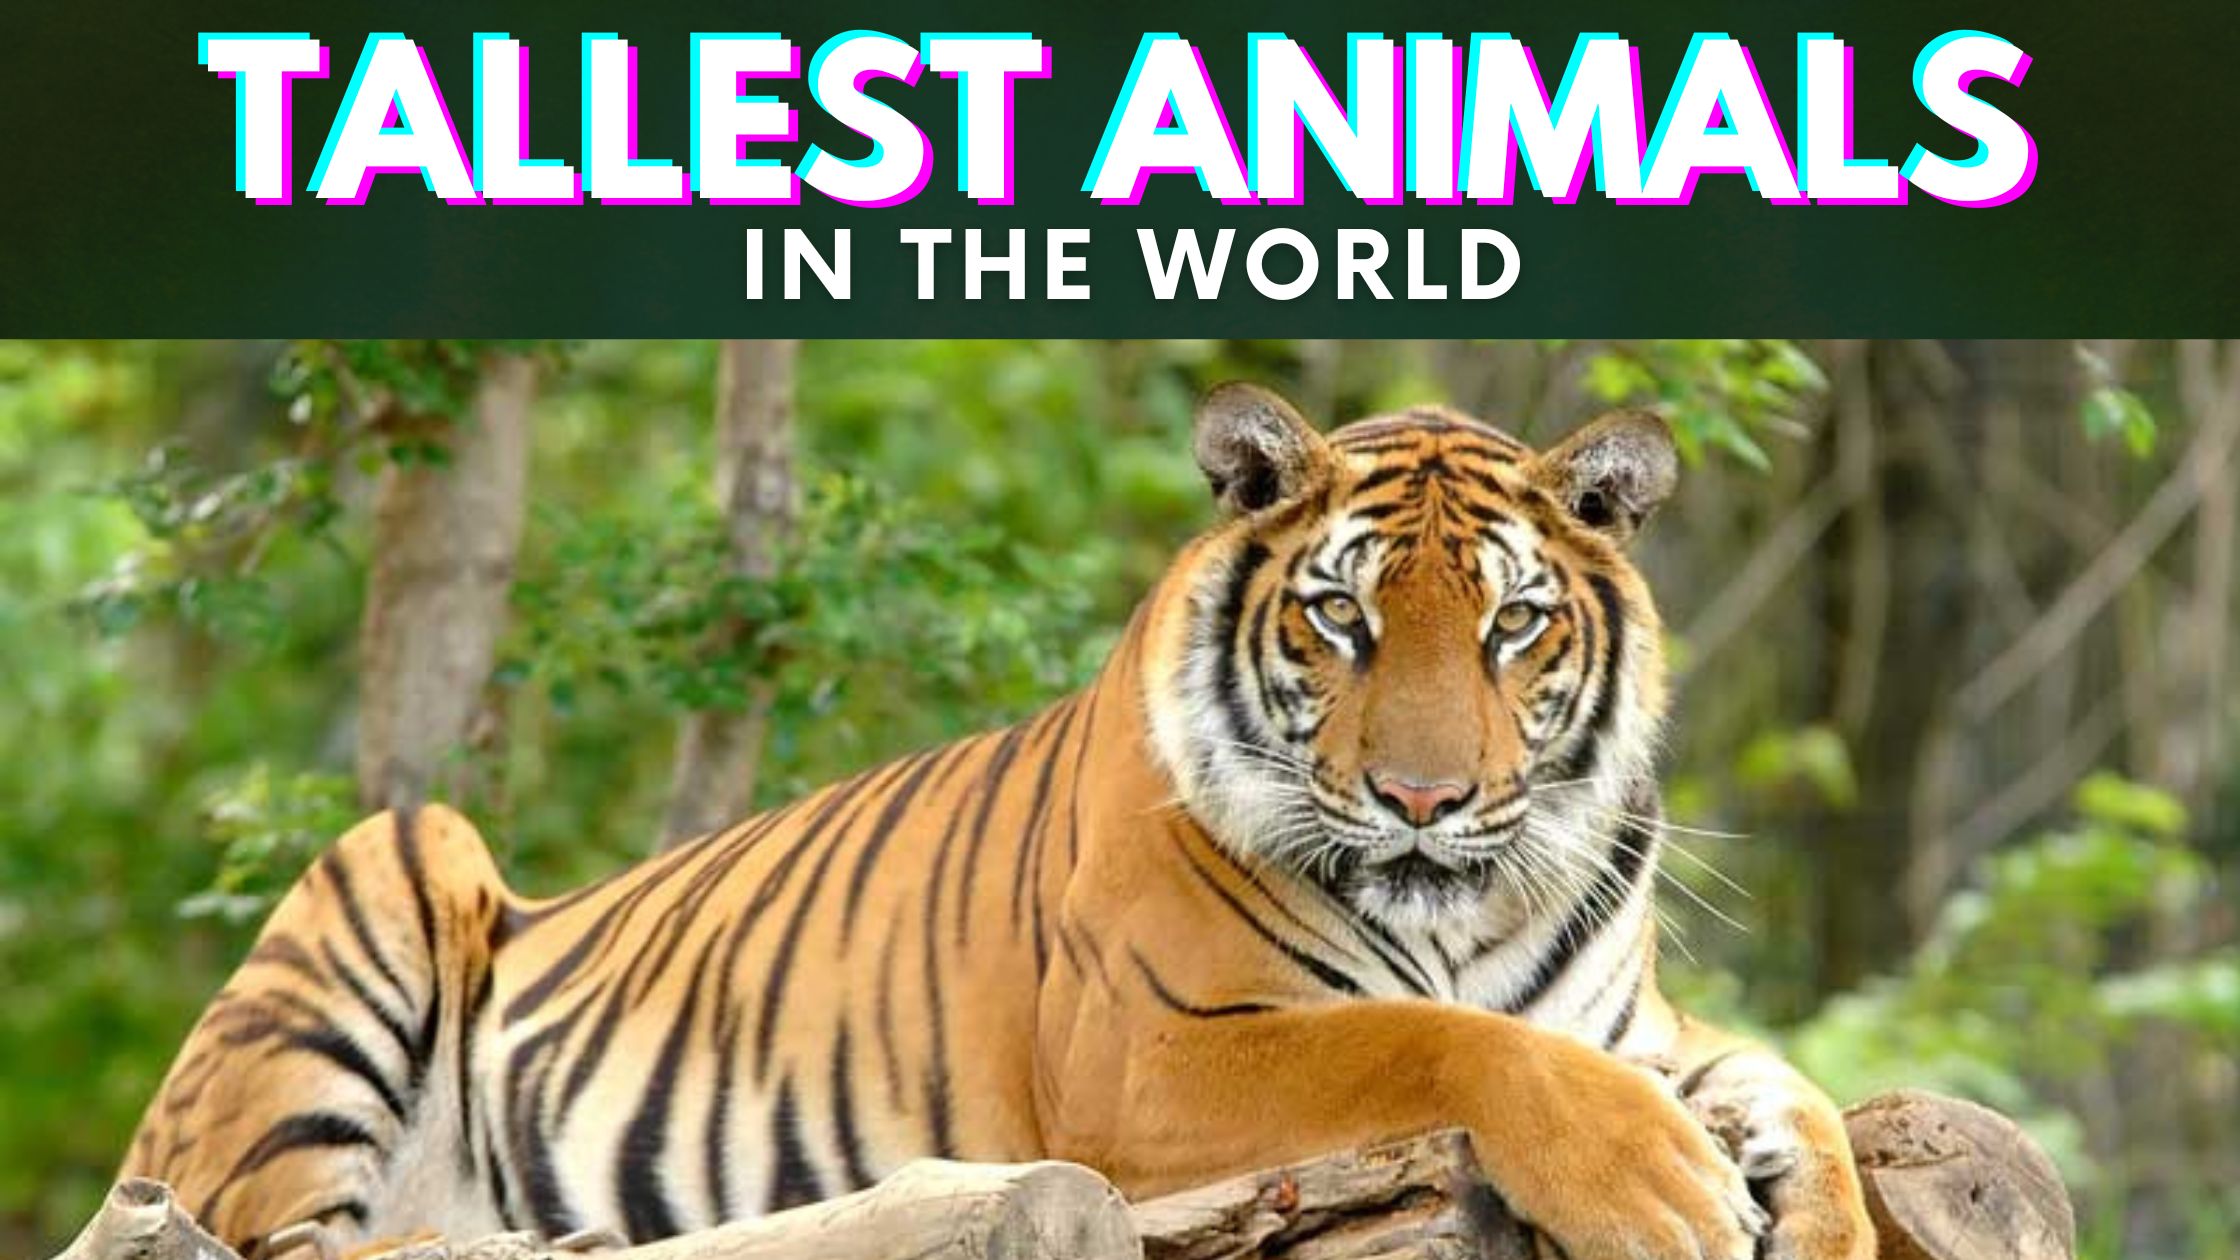 Top 10 Tallest Animals in the World